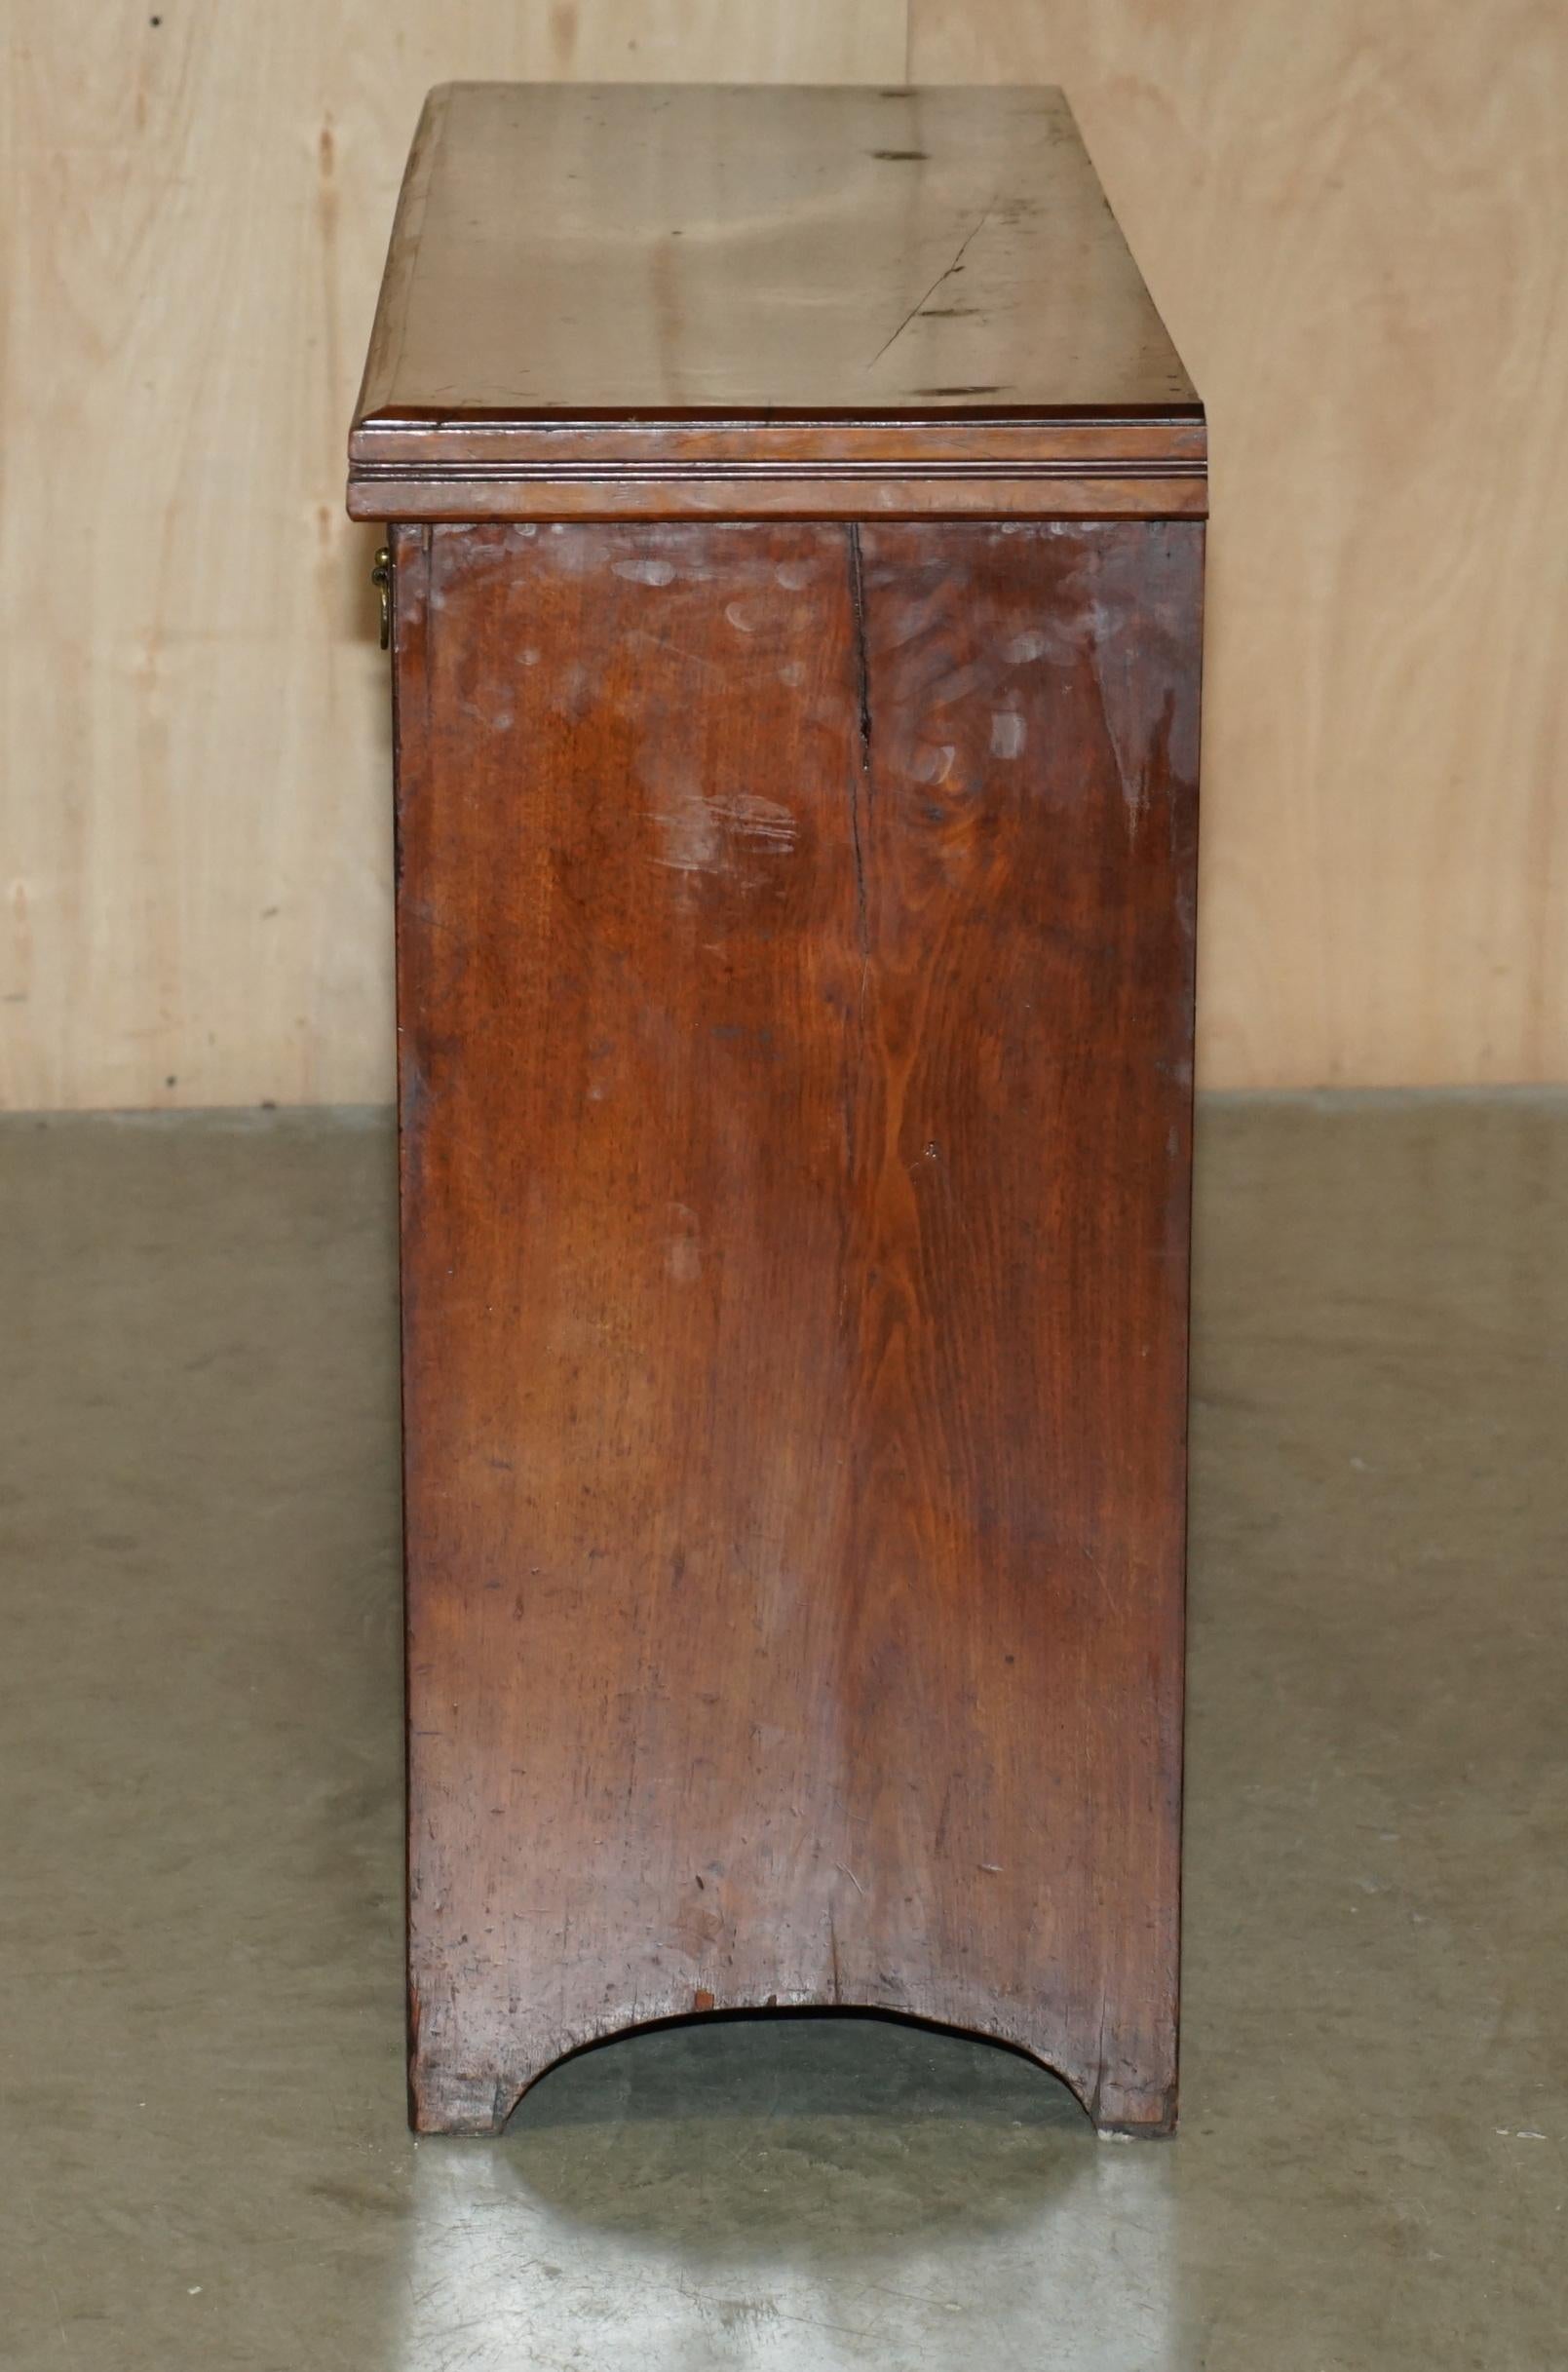 ANTIQUE ENGLISH COUNTRY OAK CiRCA 1880 VICTORIAN SIDEBOARD BASE WITH DRAWERS For Sale 7